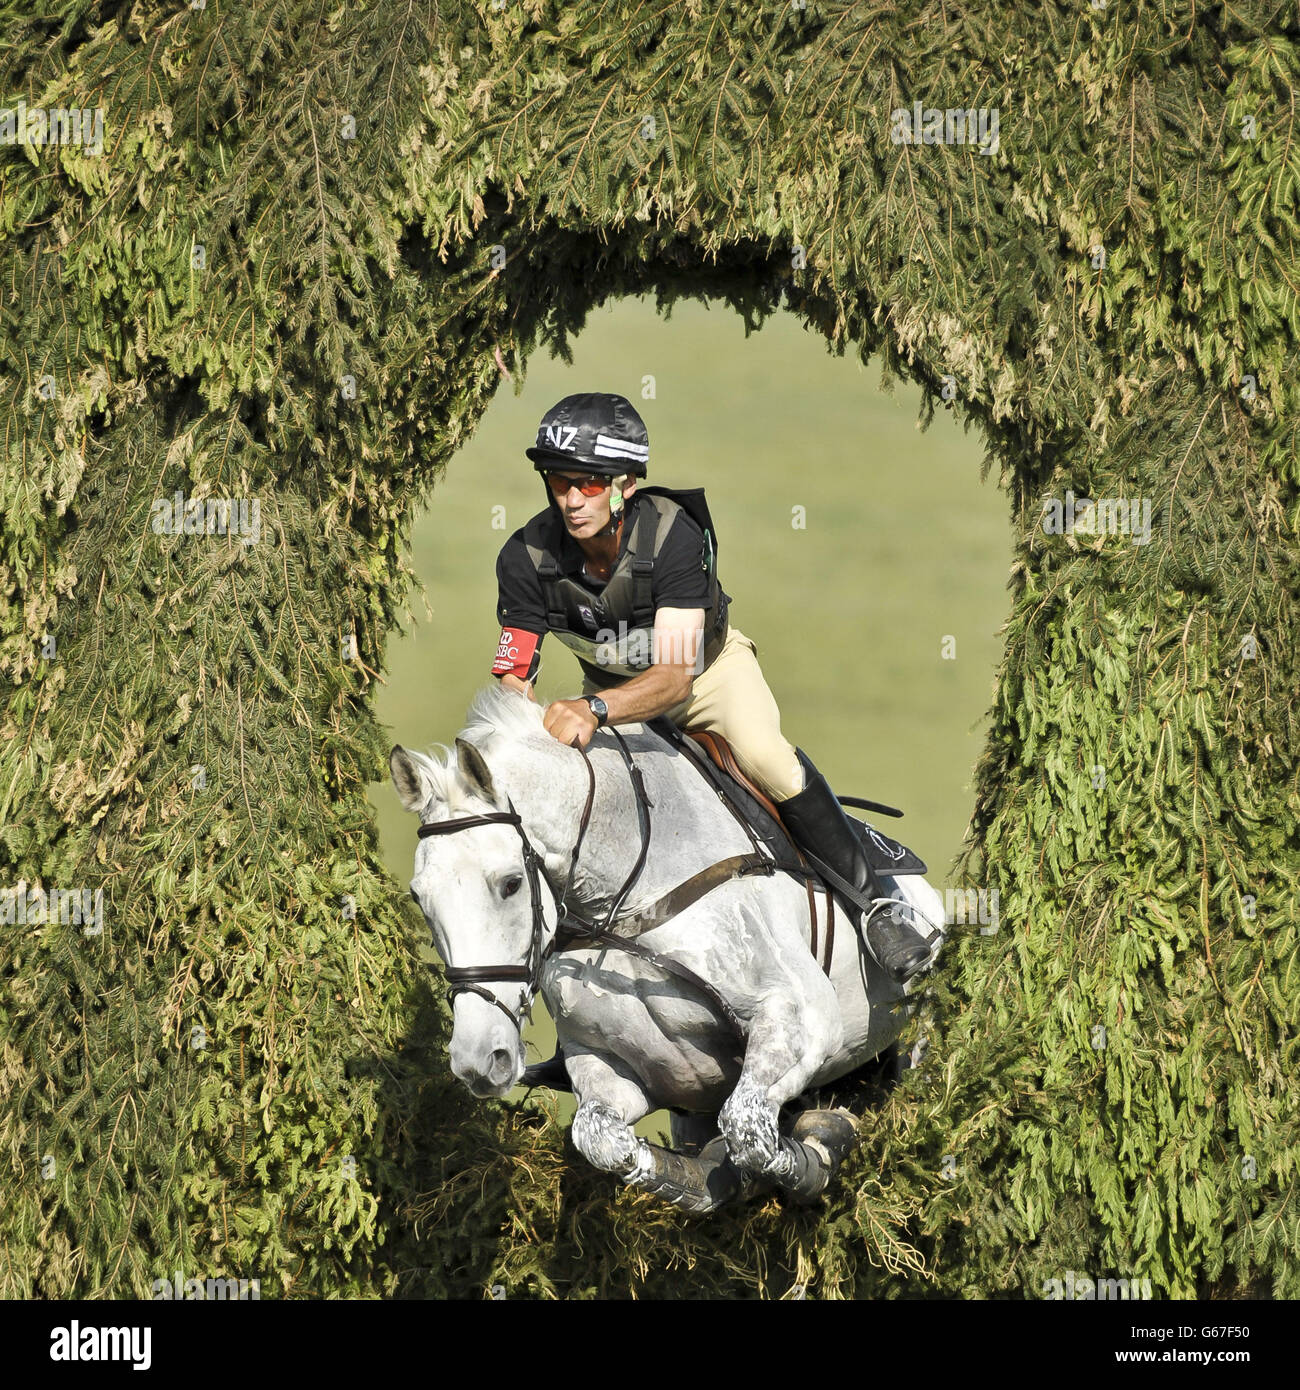 Winner of the CIC *** Section A New Zealand's Andrew Nicholson on Avebury leaps through the Owl Hole in the Cross Country during day four of the Barbury International Horse Trials at Barbury Castle, Wiltshire. Stock Photo